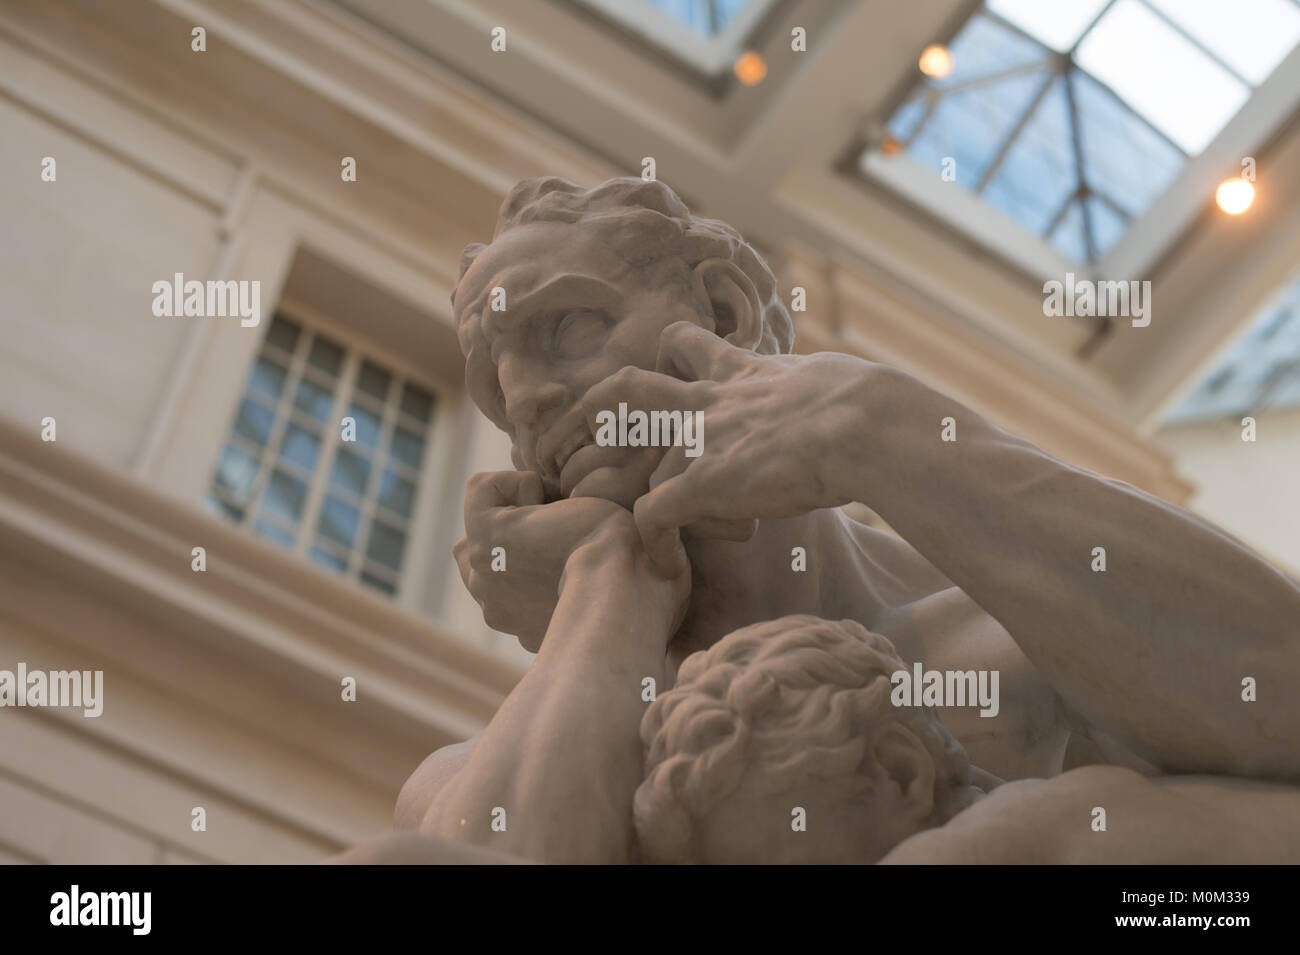 Low angle view of marble sculpture of a man gripping his face in pain, Metropolitan Museum of Art, New York City , New York Stock Photo